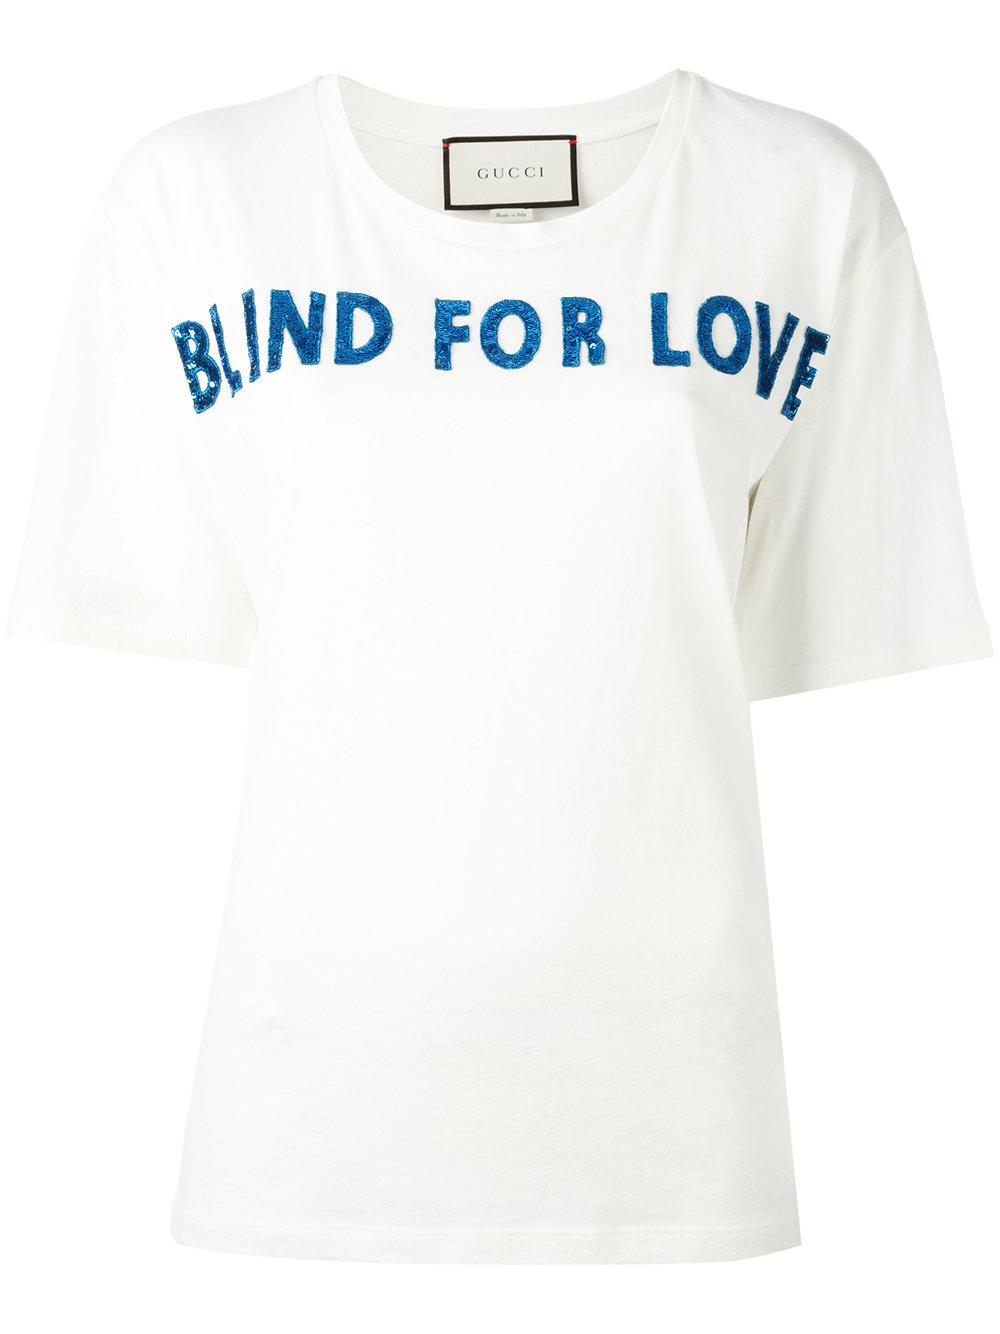 gucci t shirt blind for love